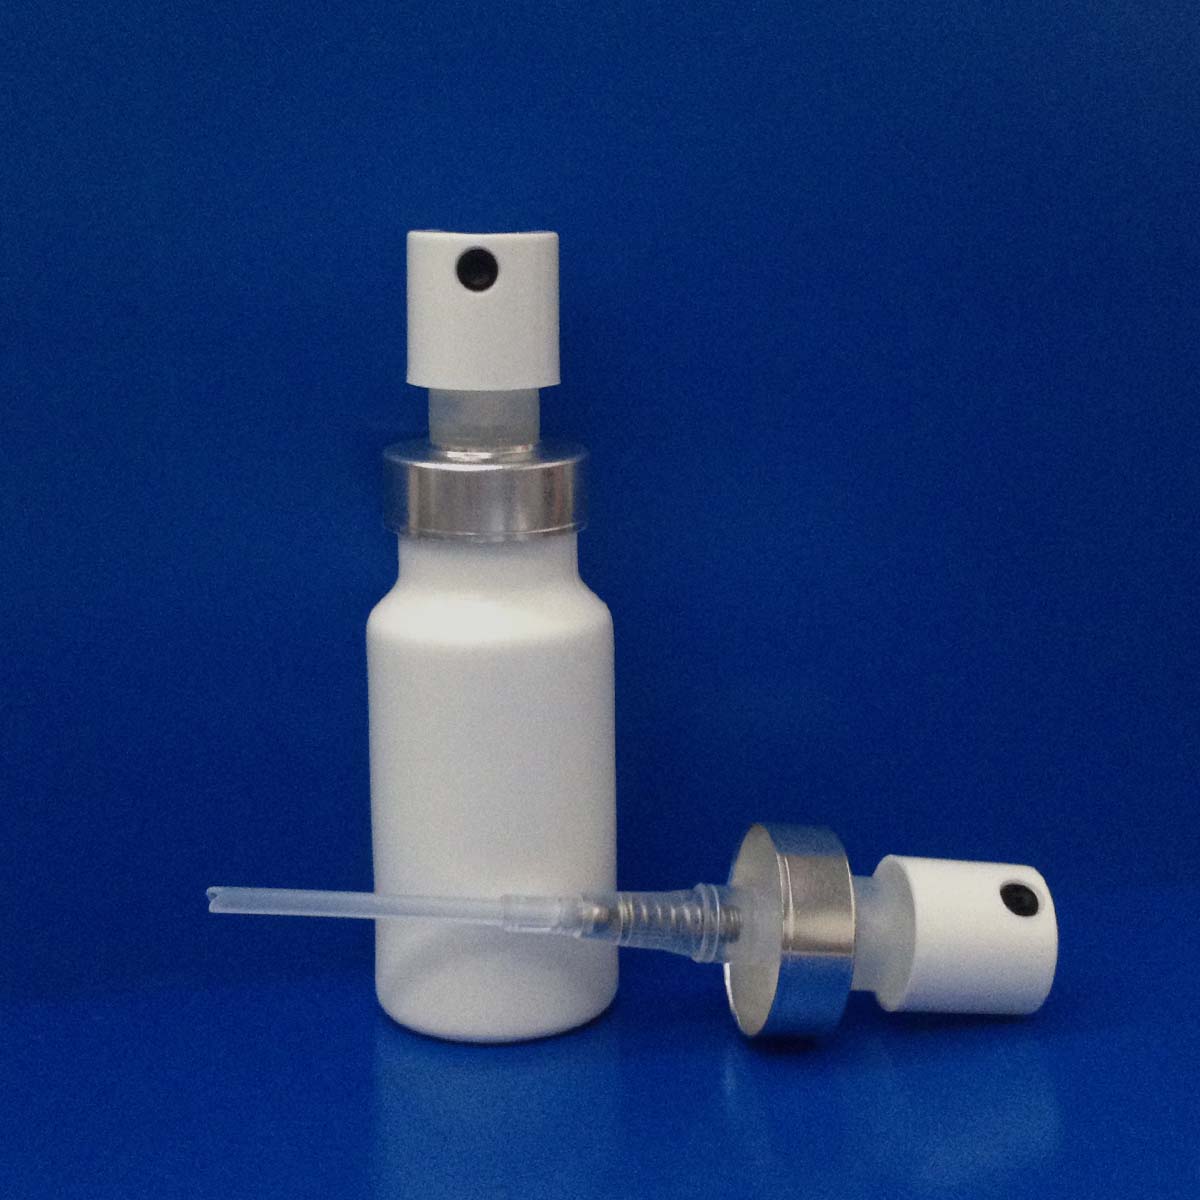 How to use 20mm crimp-on topical spray pump 50mcl?